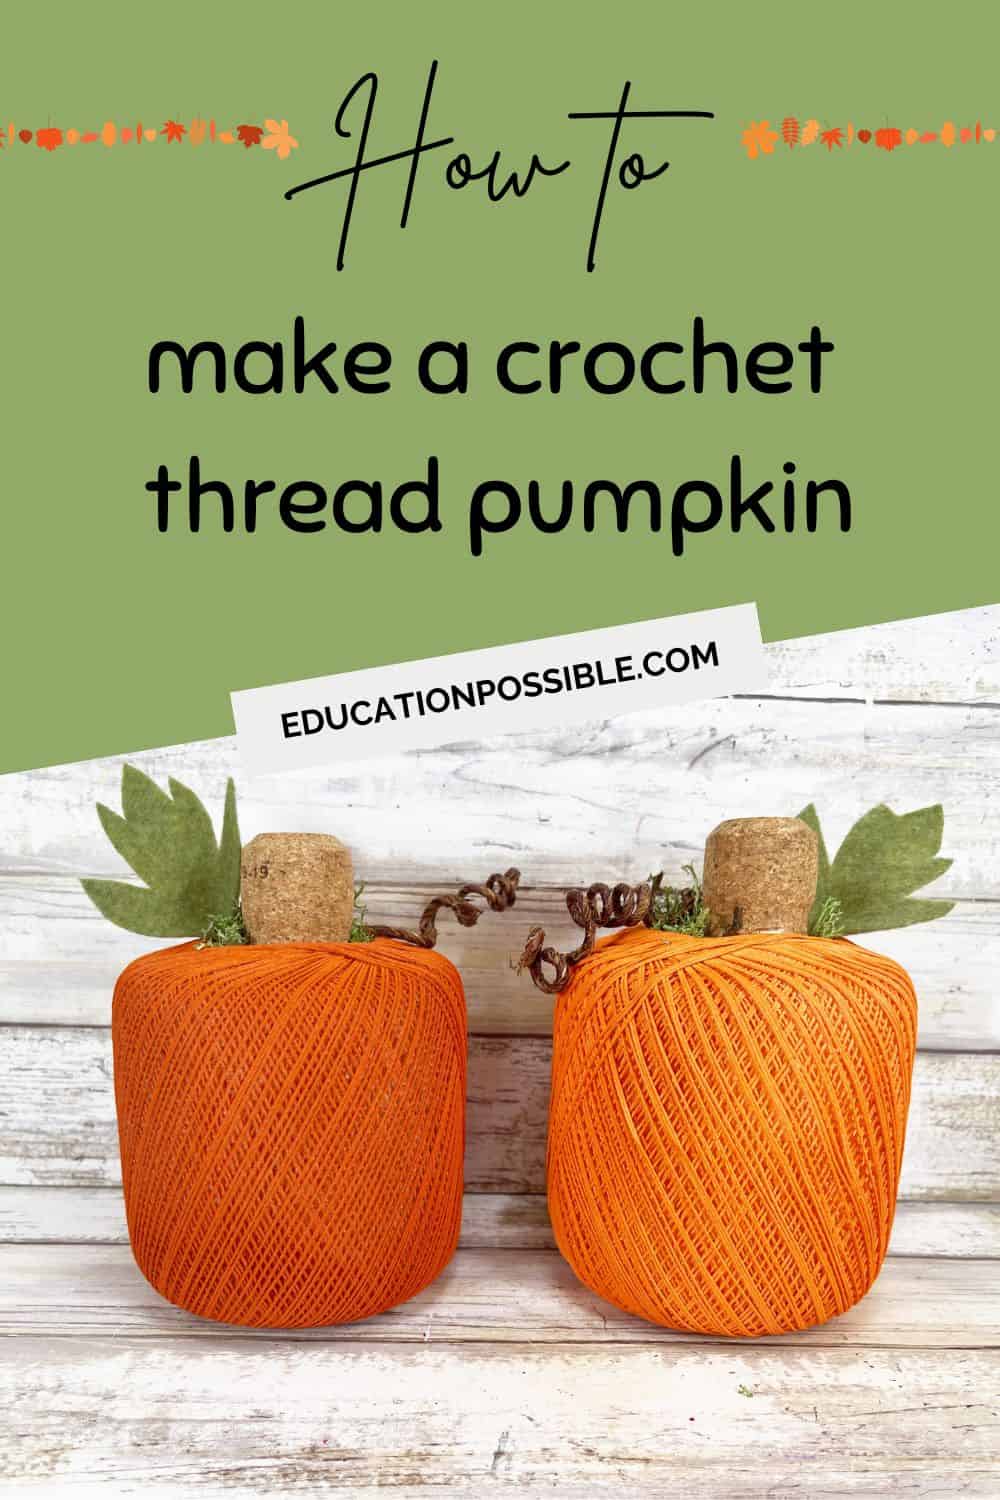 Two orange pumpkins made from a ball of crochet thread on a white wooden table.